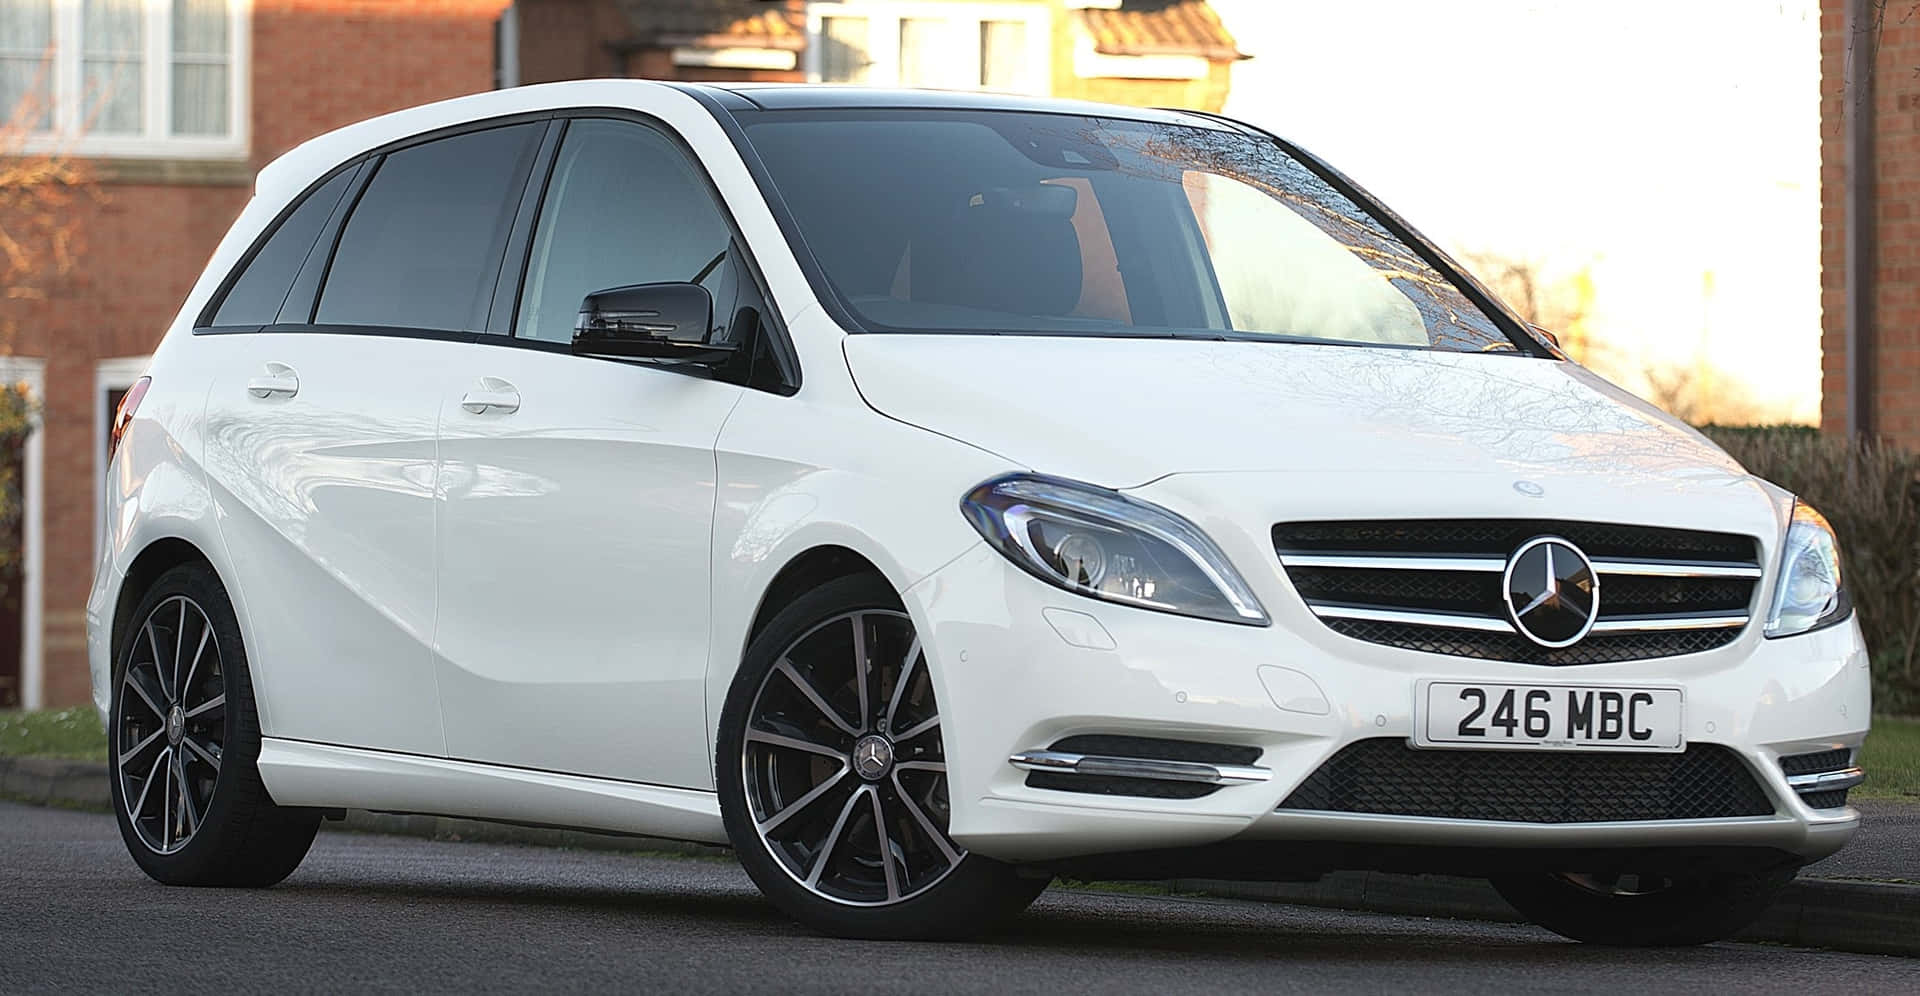 Sleek and Stylish Mercedes Benz B-Class on the Road Wallpaper